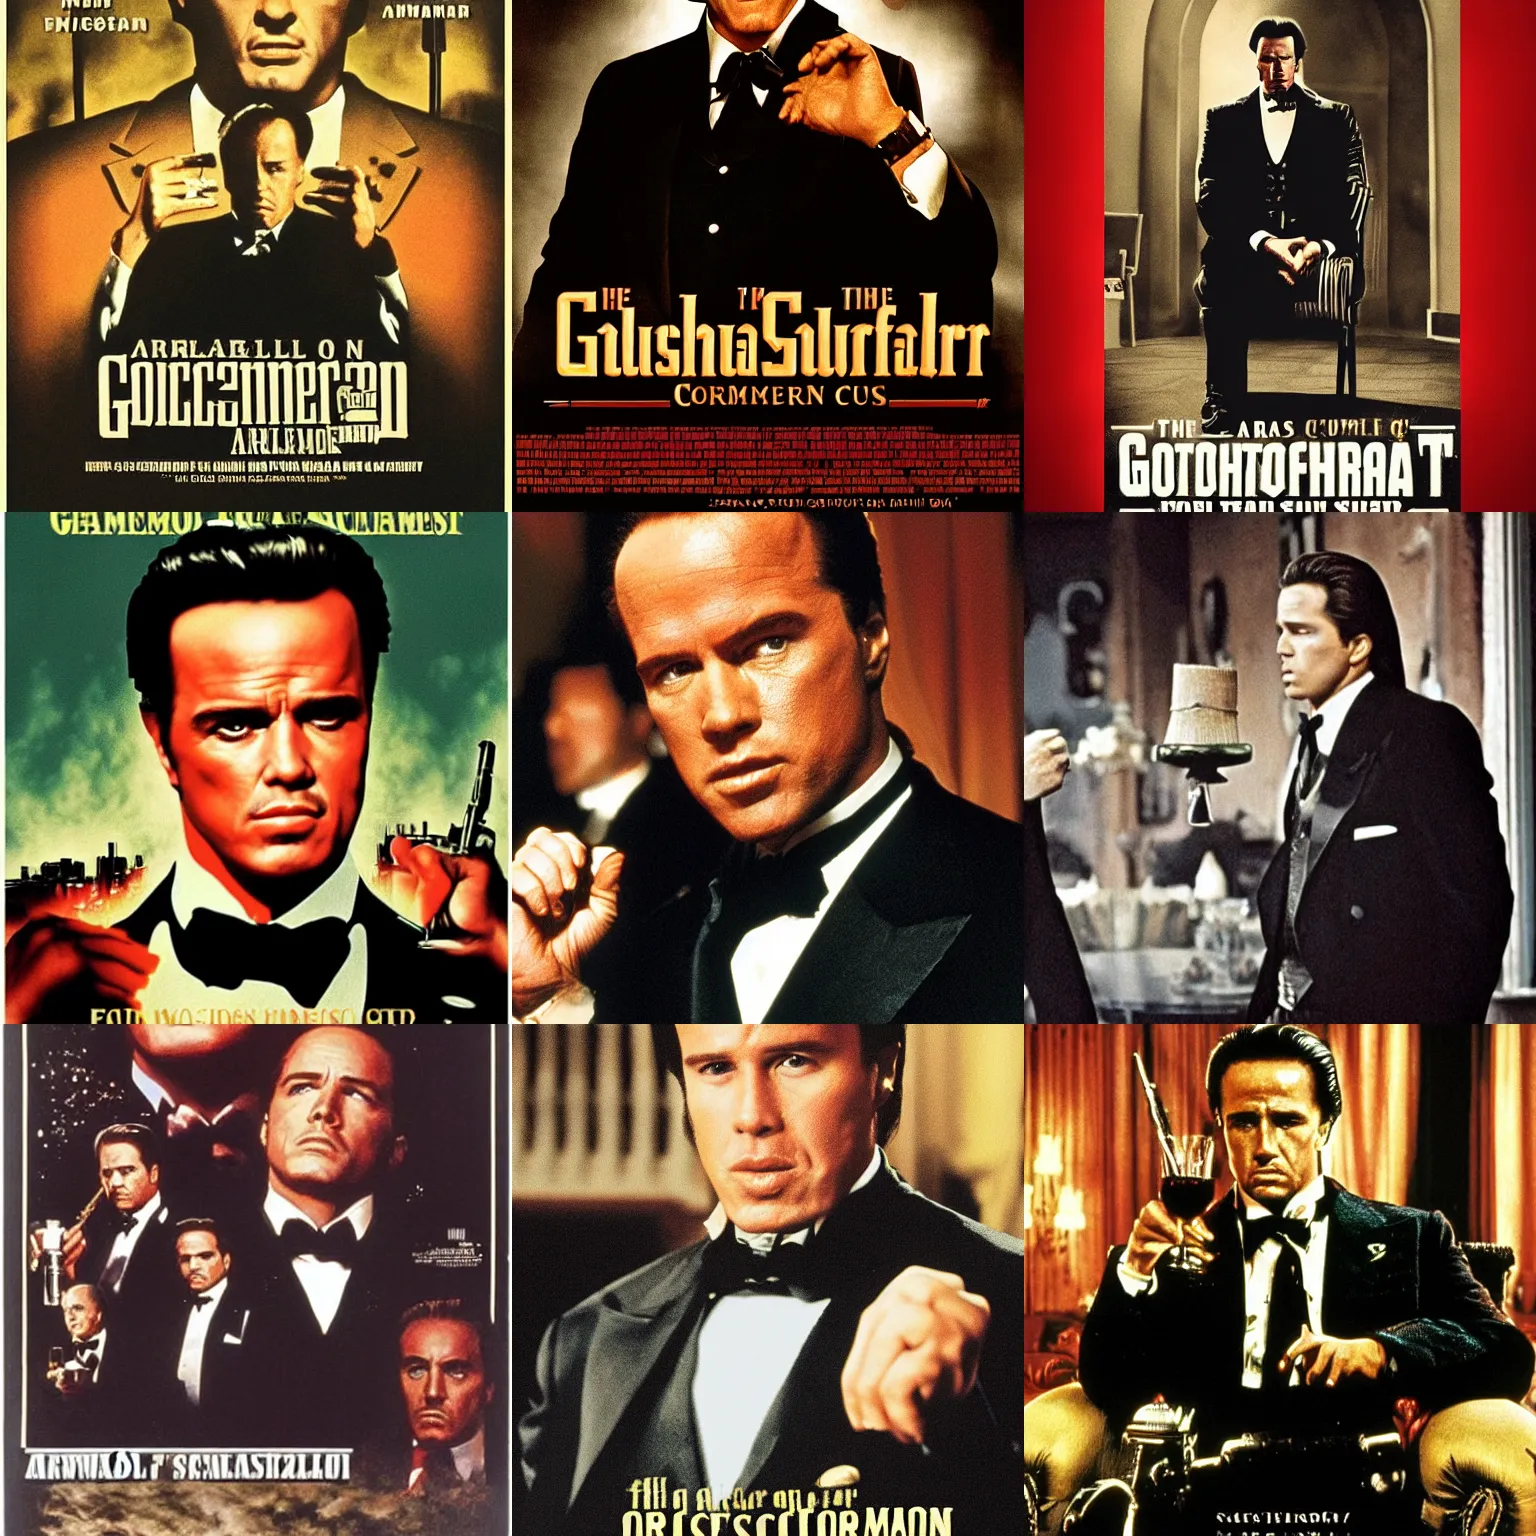 Prompt: Arnold Schwarzengger stars in The godfather, poster